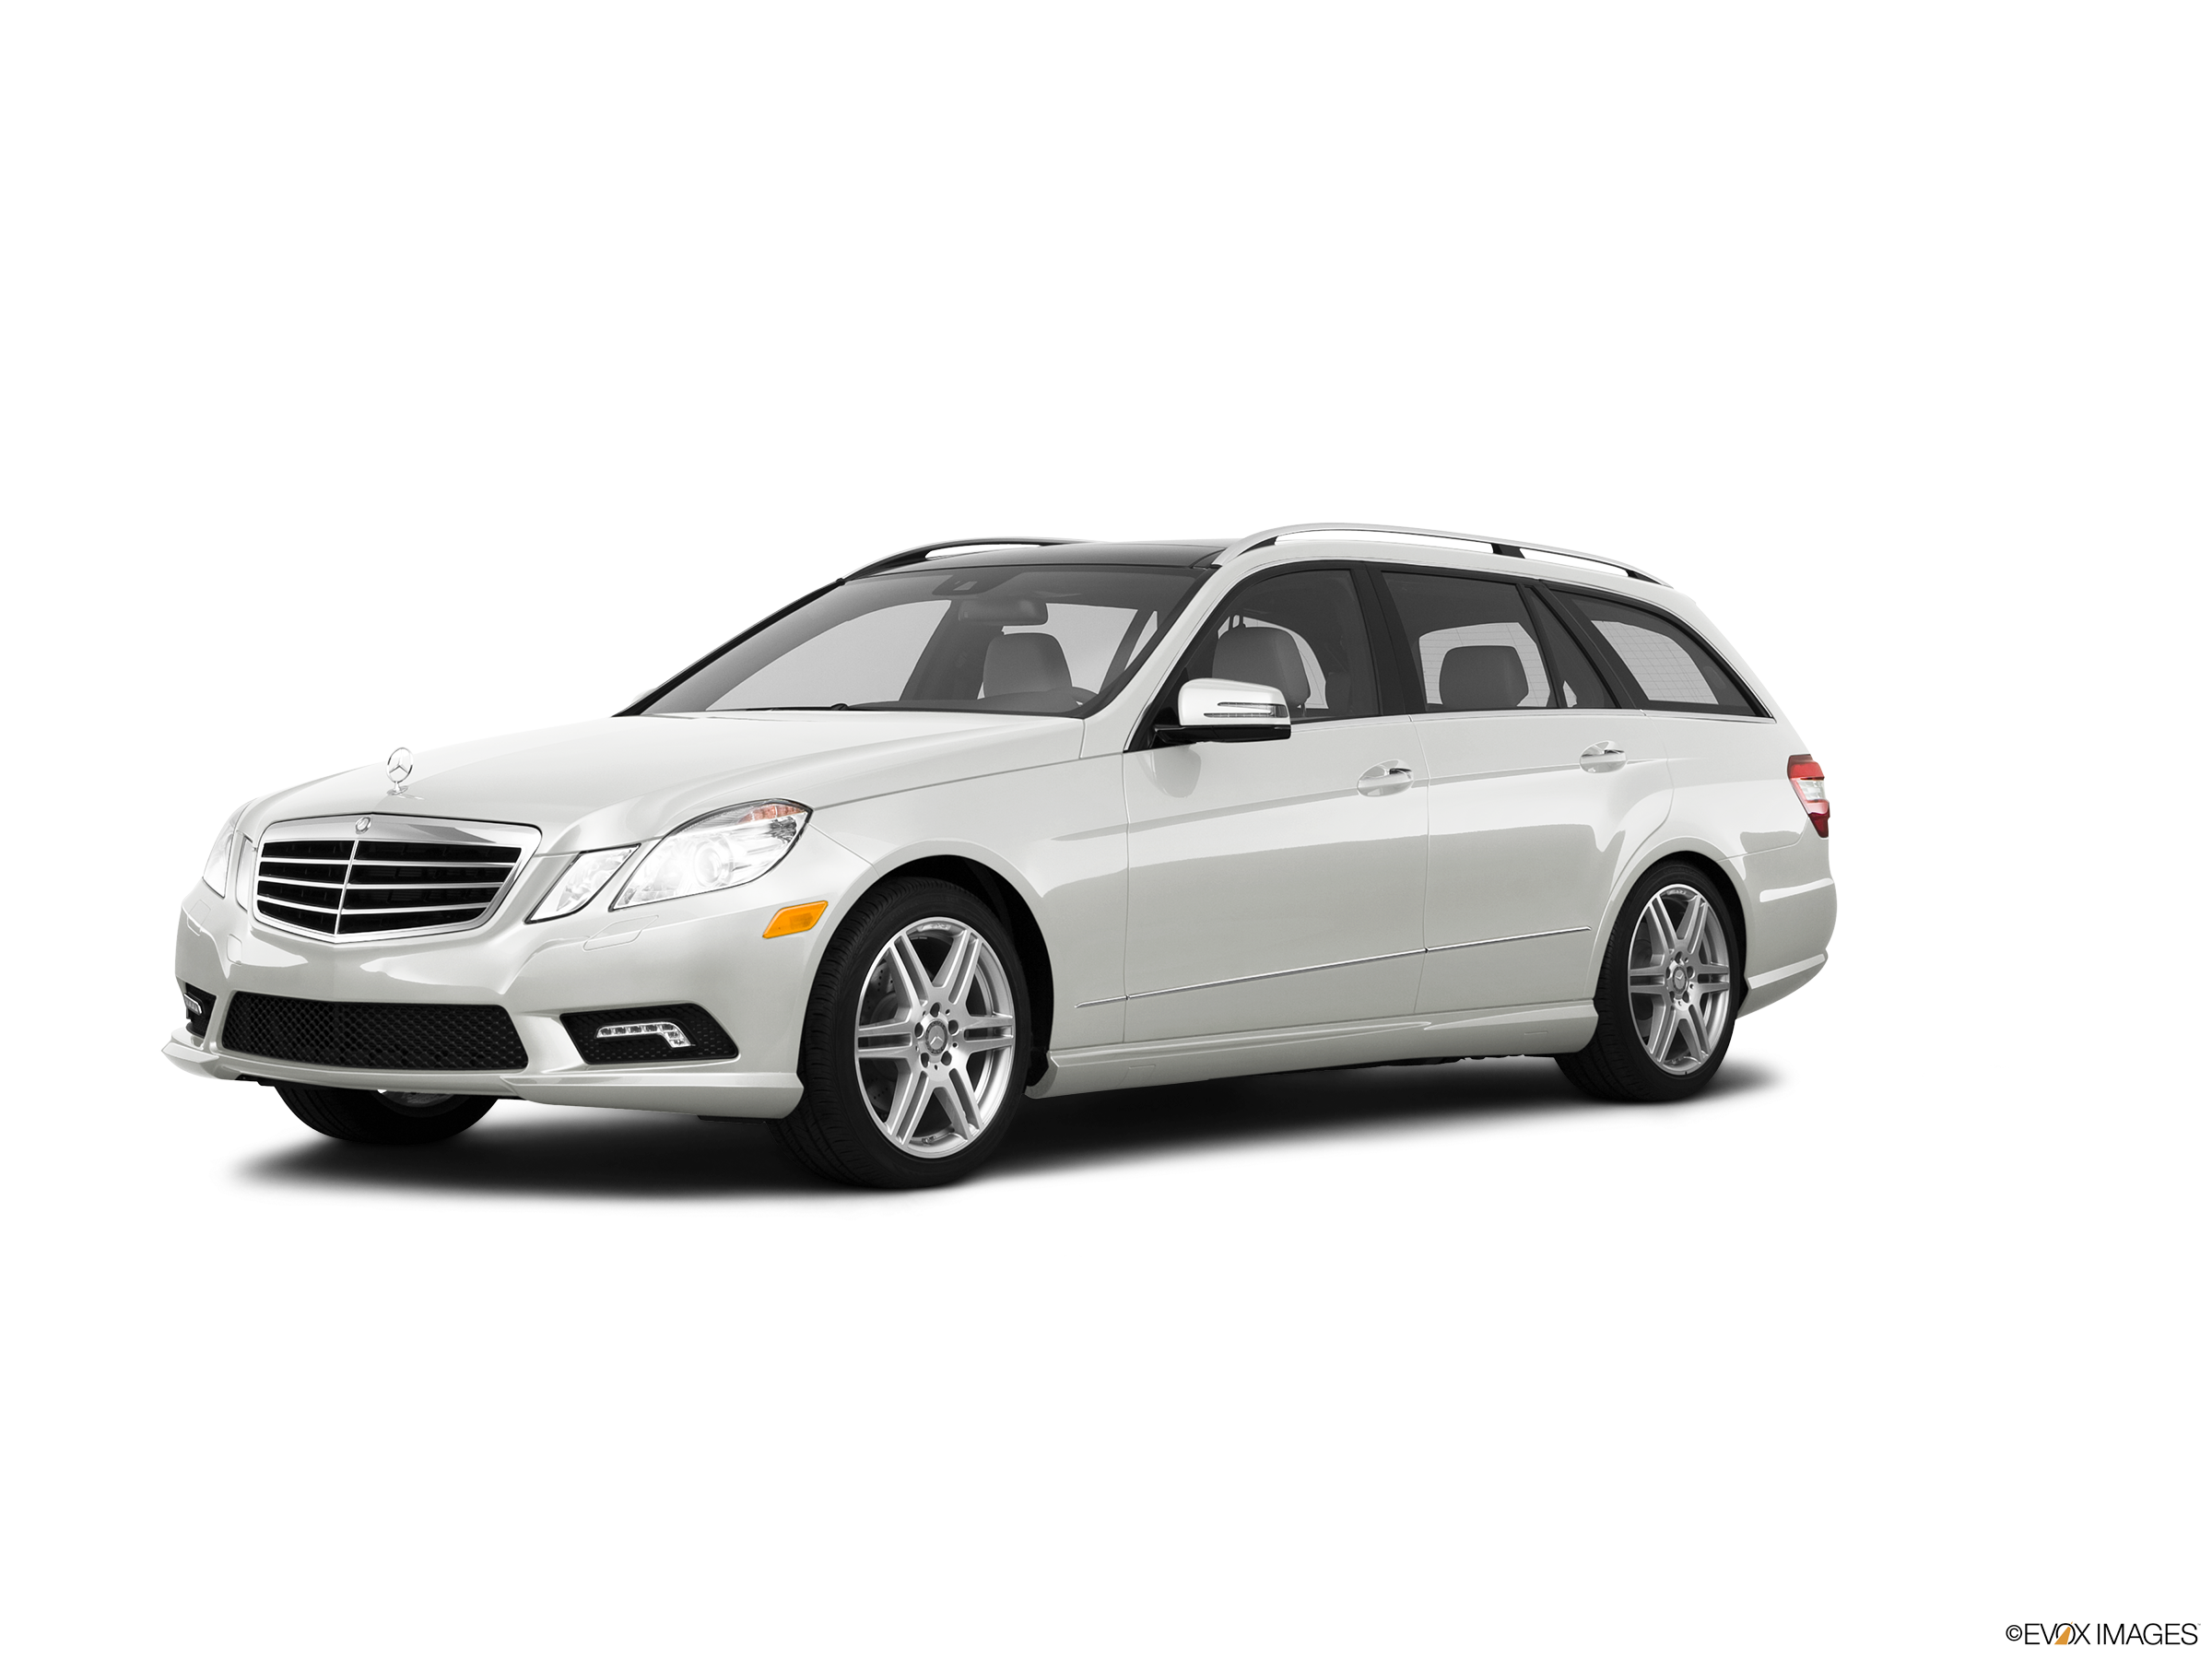 Used 11 Mercedes Benz E Class E 350 4matic Wagon 4d Prices Kelley Blue Book